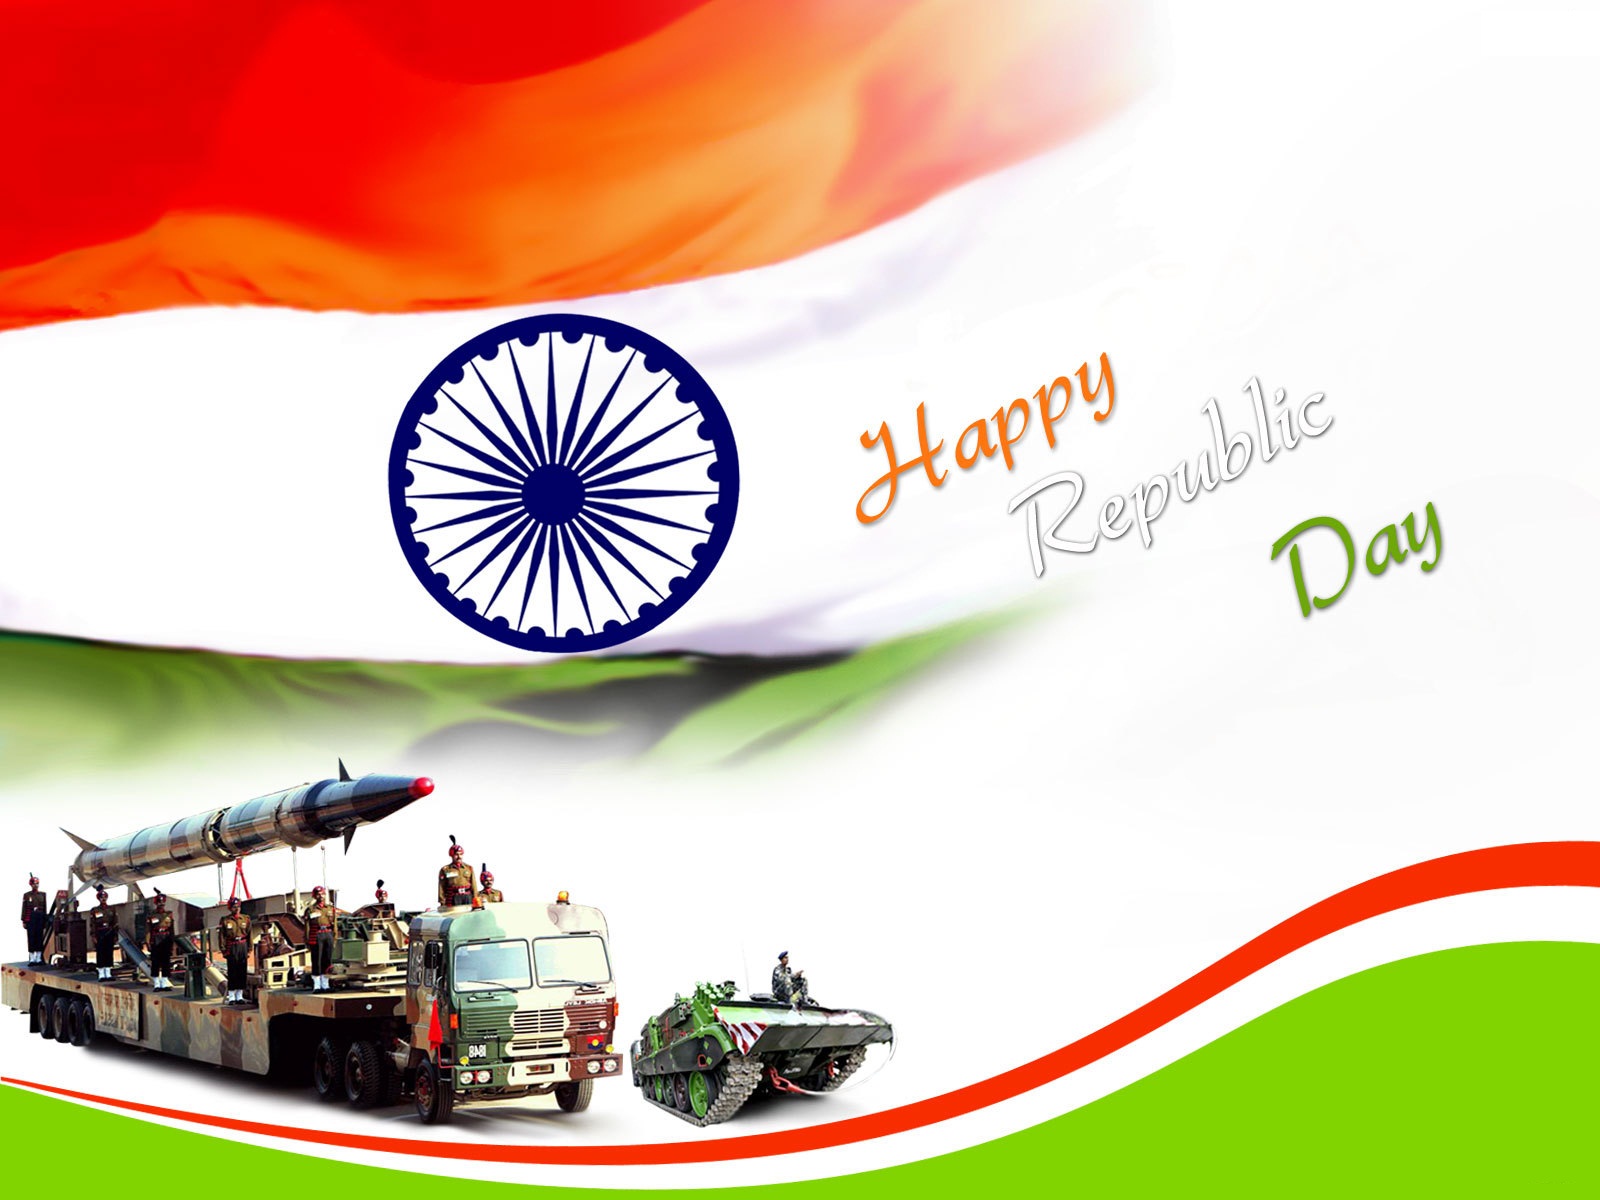 republic day indian flag pared wallpaper wishes